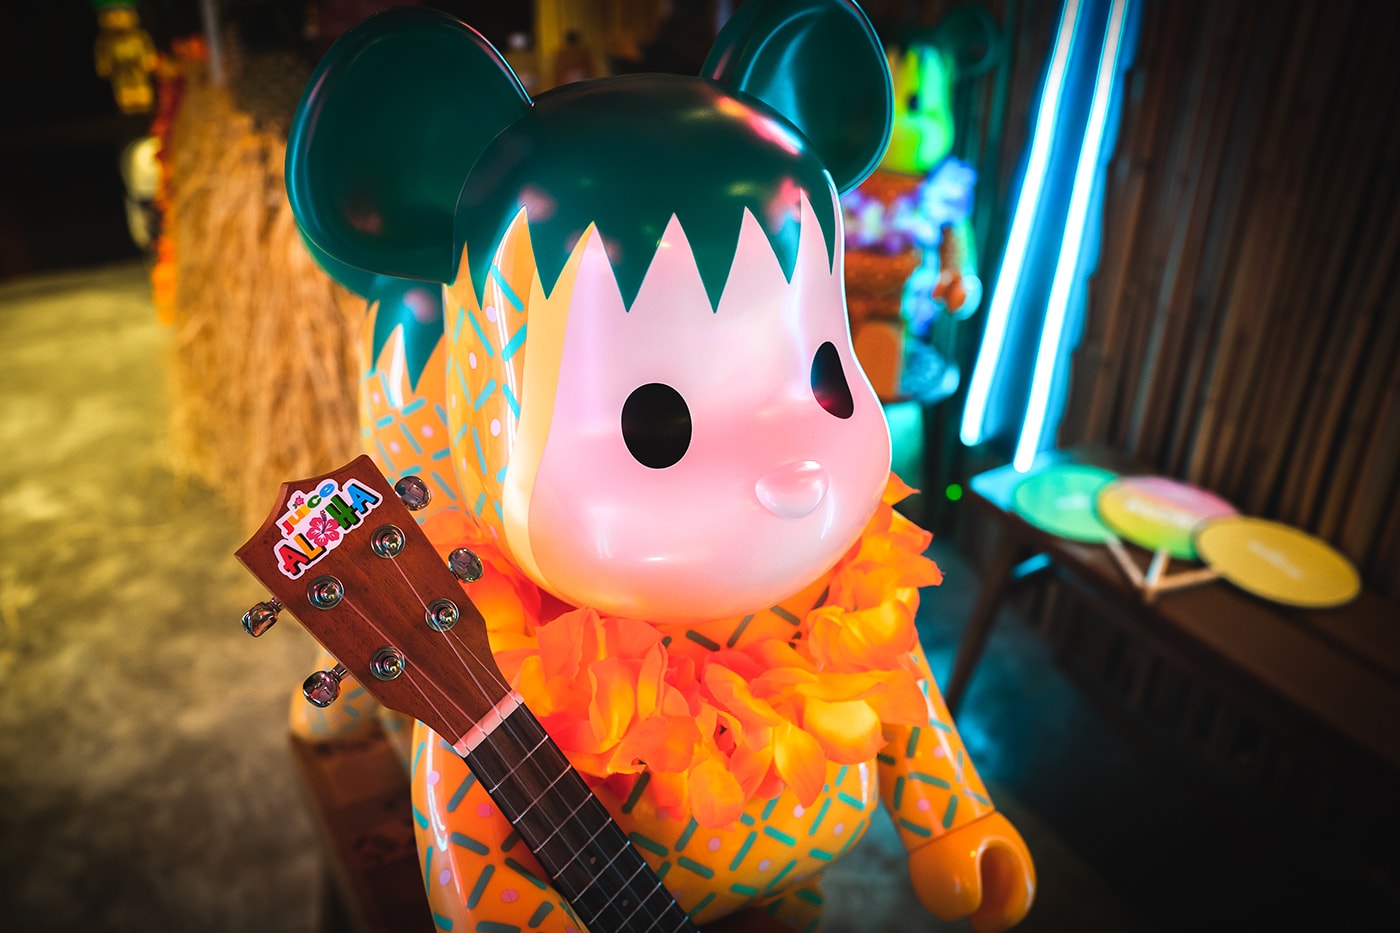 CLOT Medicom Toy BE@RBRICK Summer Fruits Pink Pineapple Closer Look Release Info Date Buy Price 